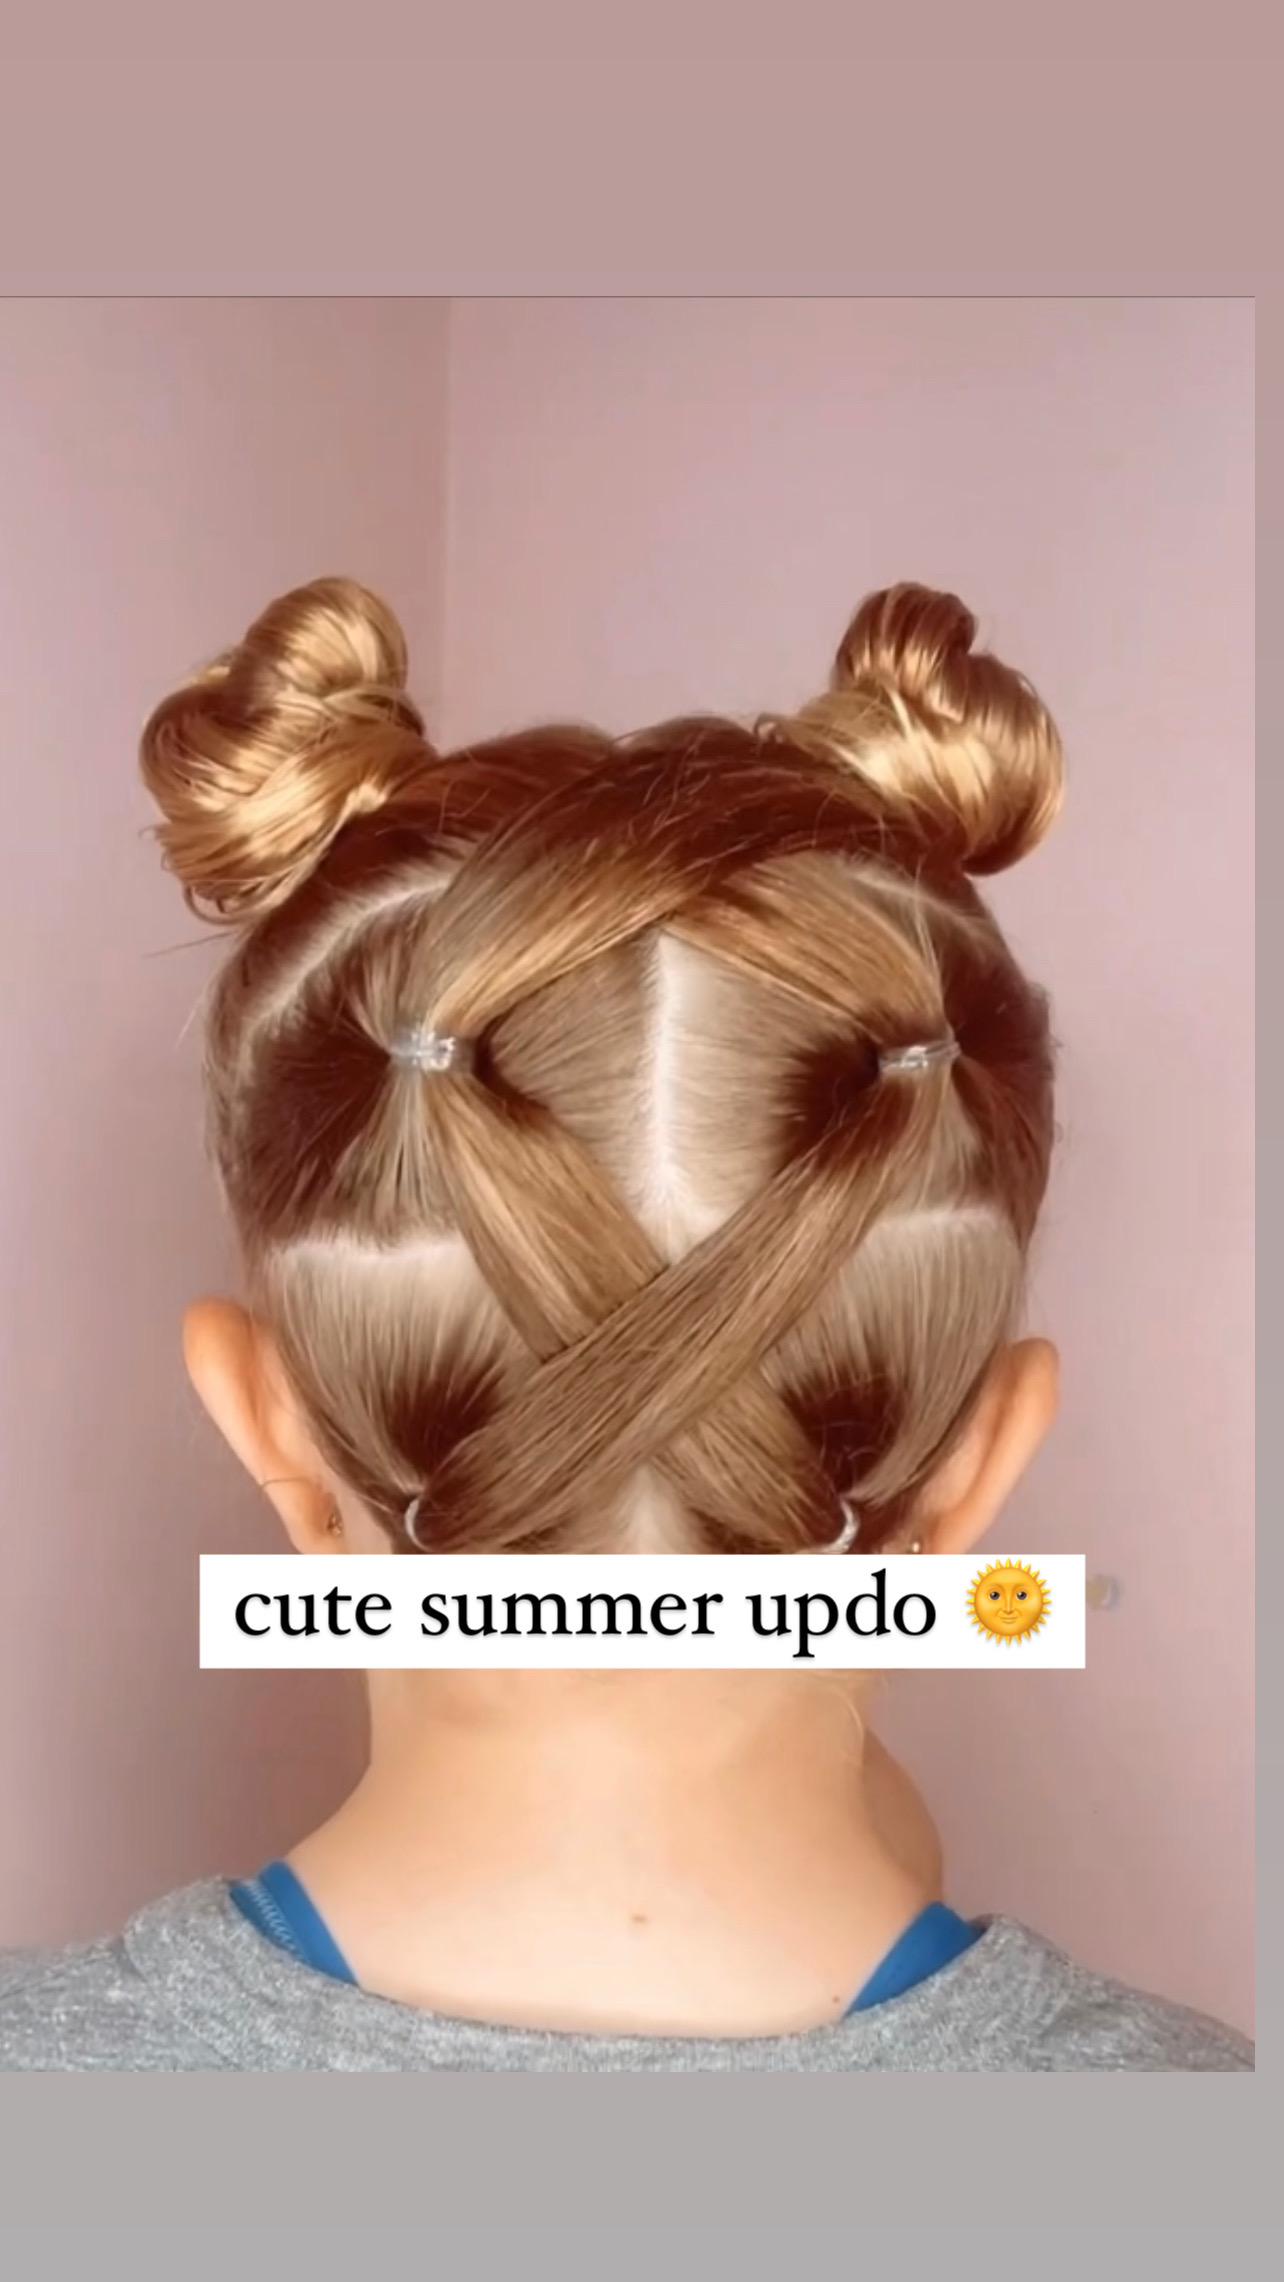 15 Black Girl Styles That'll Have Your Hair Laid All Summer Long